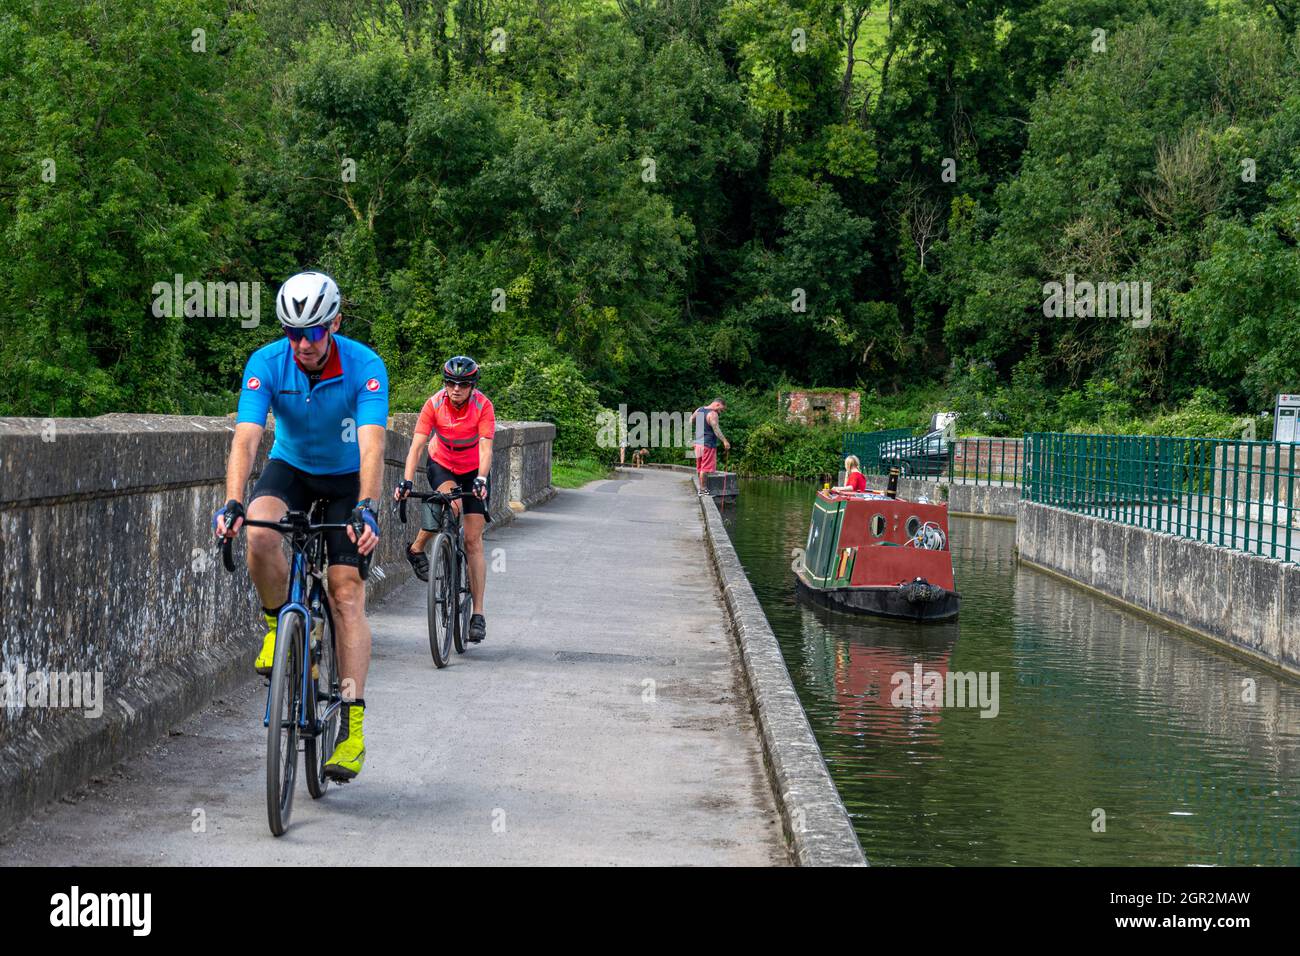 Cyclists crossing the Avoncliff aqueduct, Wiltshire, England Stock Photo